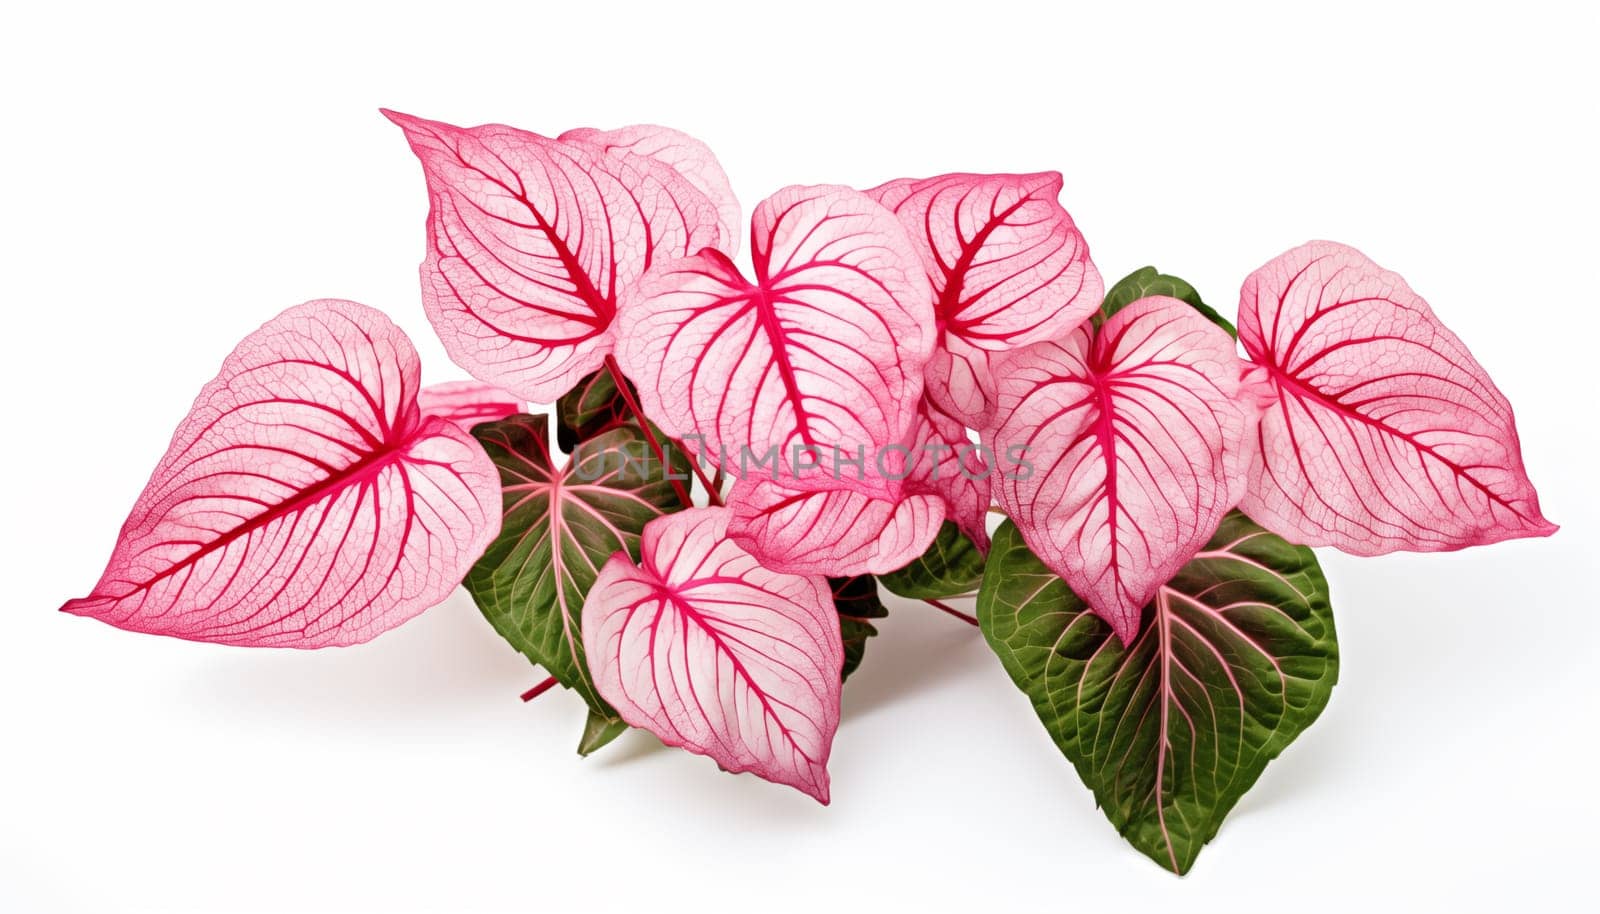 Caladiums patterned leaves on white background by Nadtochiy